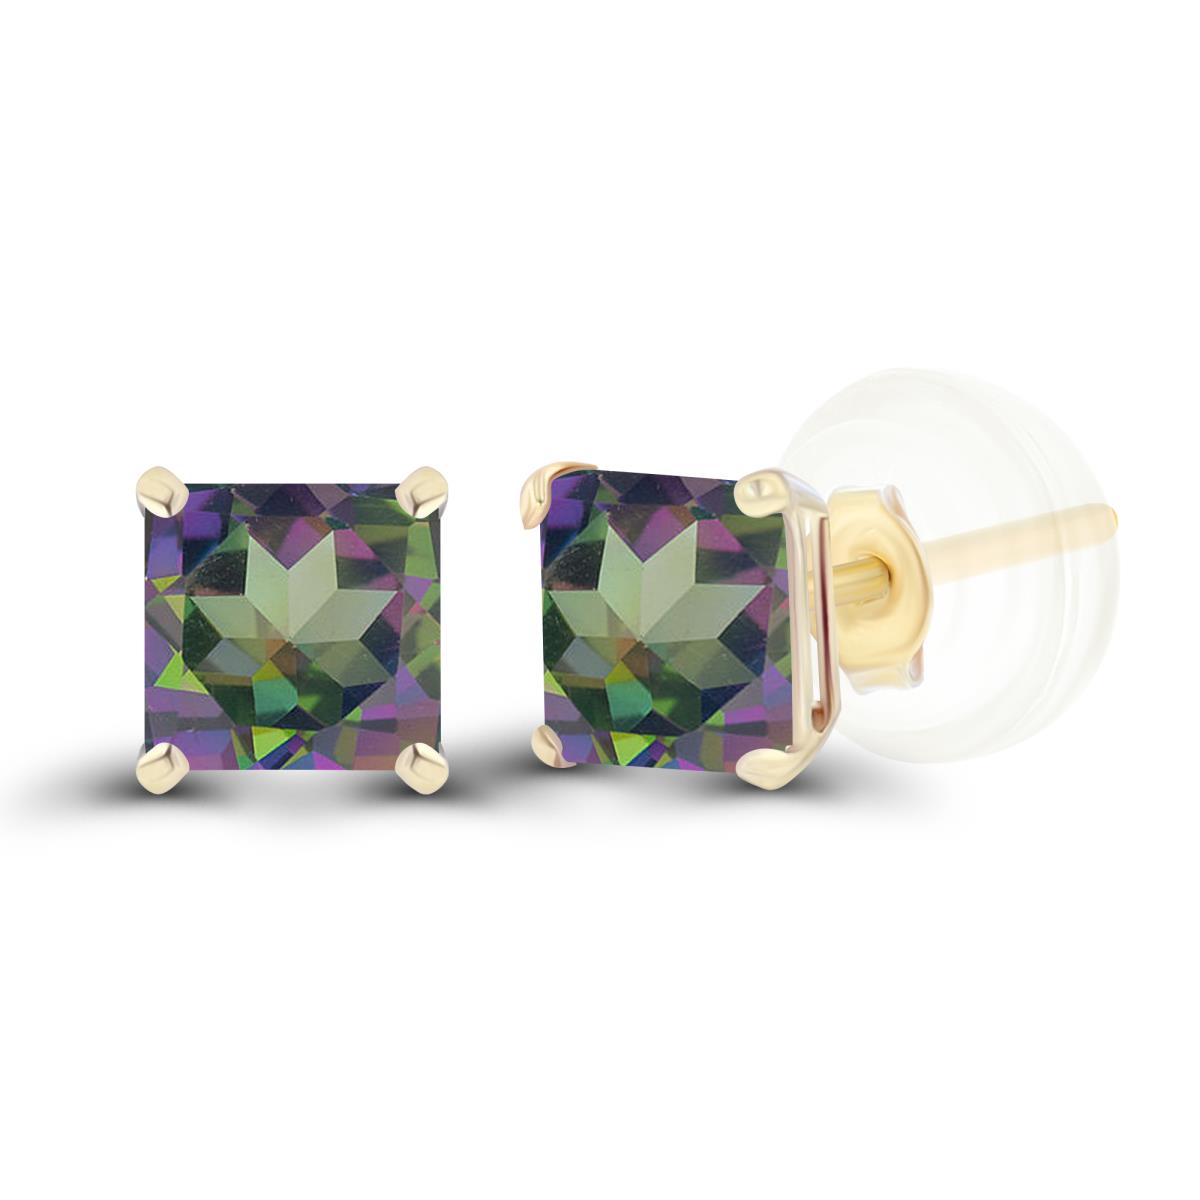 14K Yellow Gold 4mm Square Mystic Quartz Basket Stud Earrings with Silicone Back